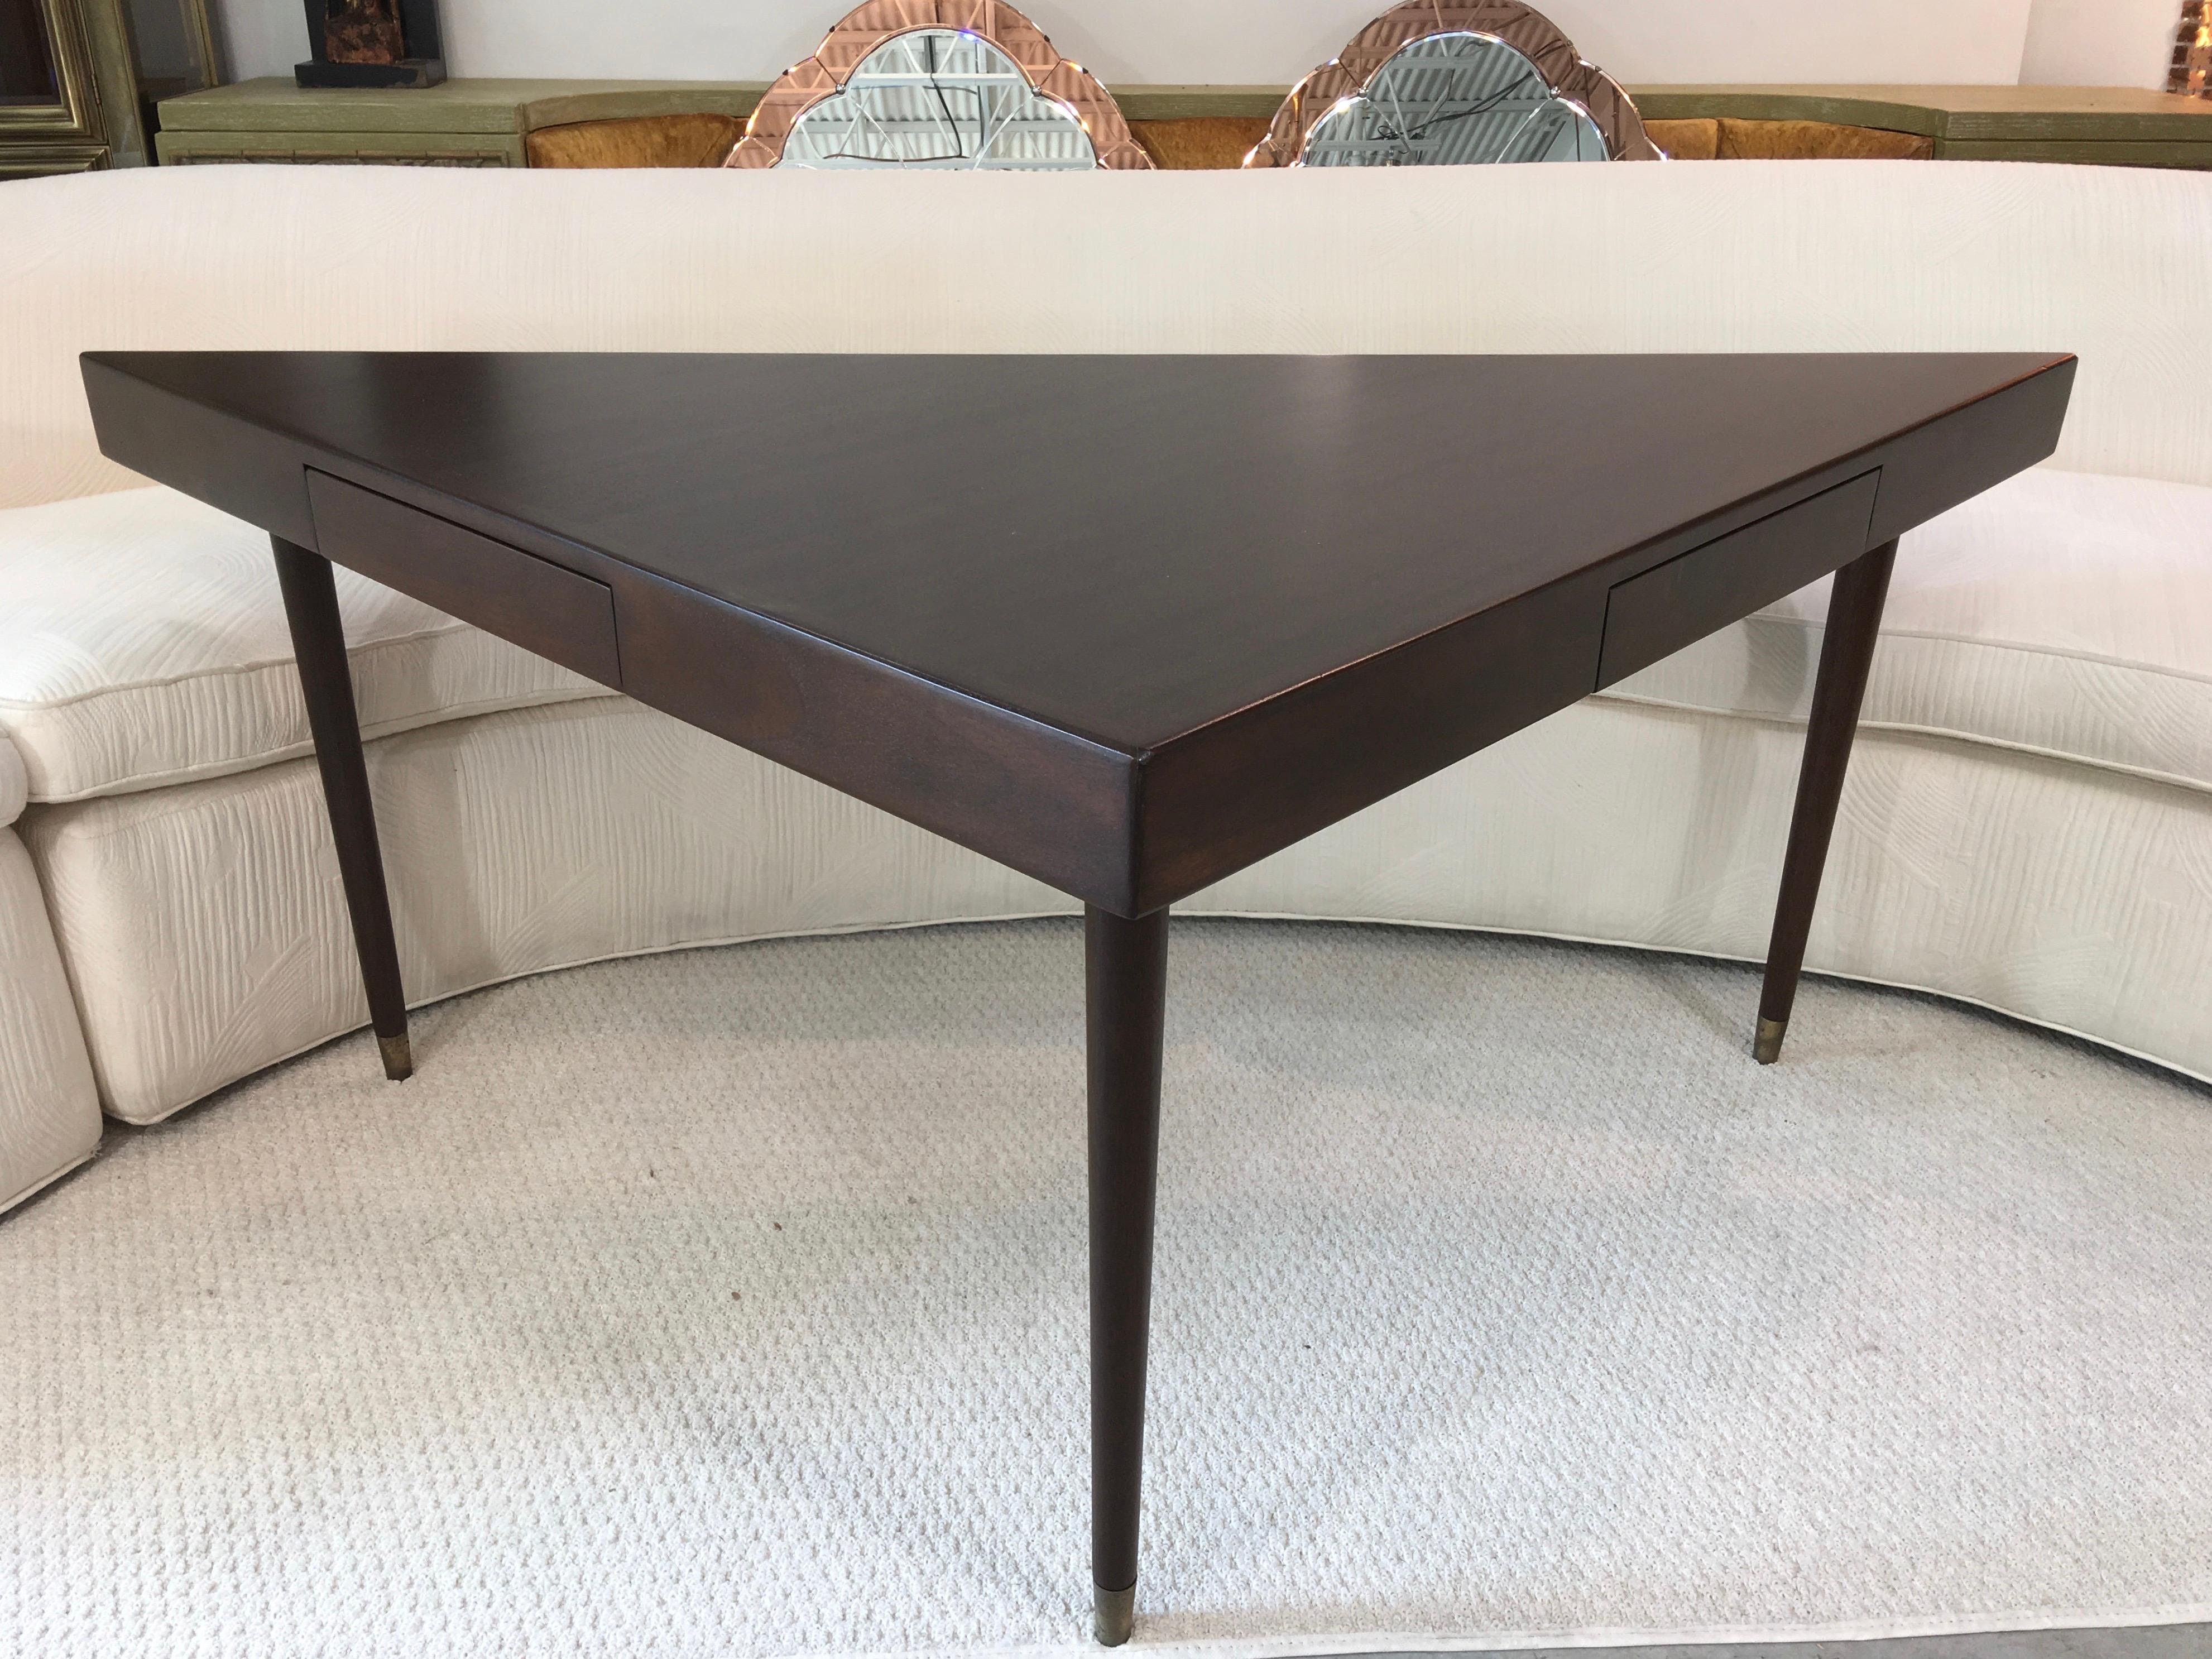 Extremely versatile well balanced triangular shaped table by Harvey Probber. Original vintage mid-1950's. Ideally suited as a corner console table behind one of his famous angular Nuclear Sert modular sofas. Singular enough to stand on its own as a